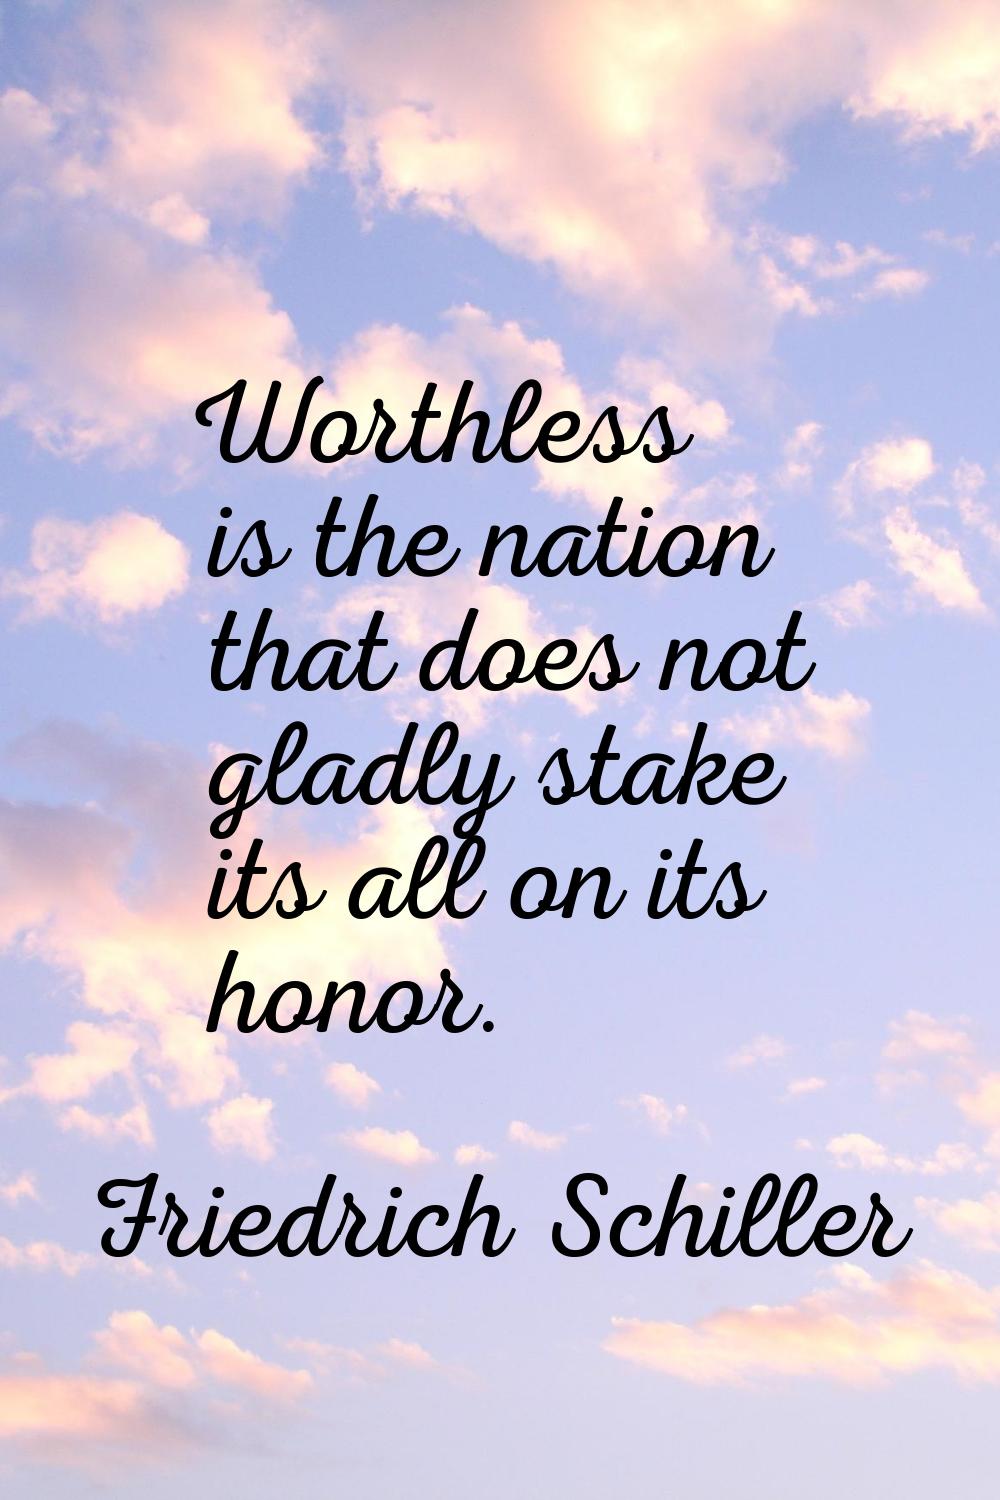 Worthless is the nation that does not gladly stake its all on its honor.